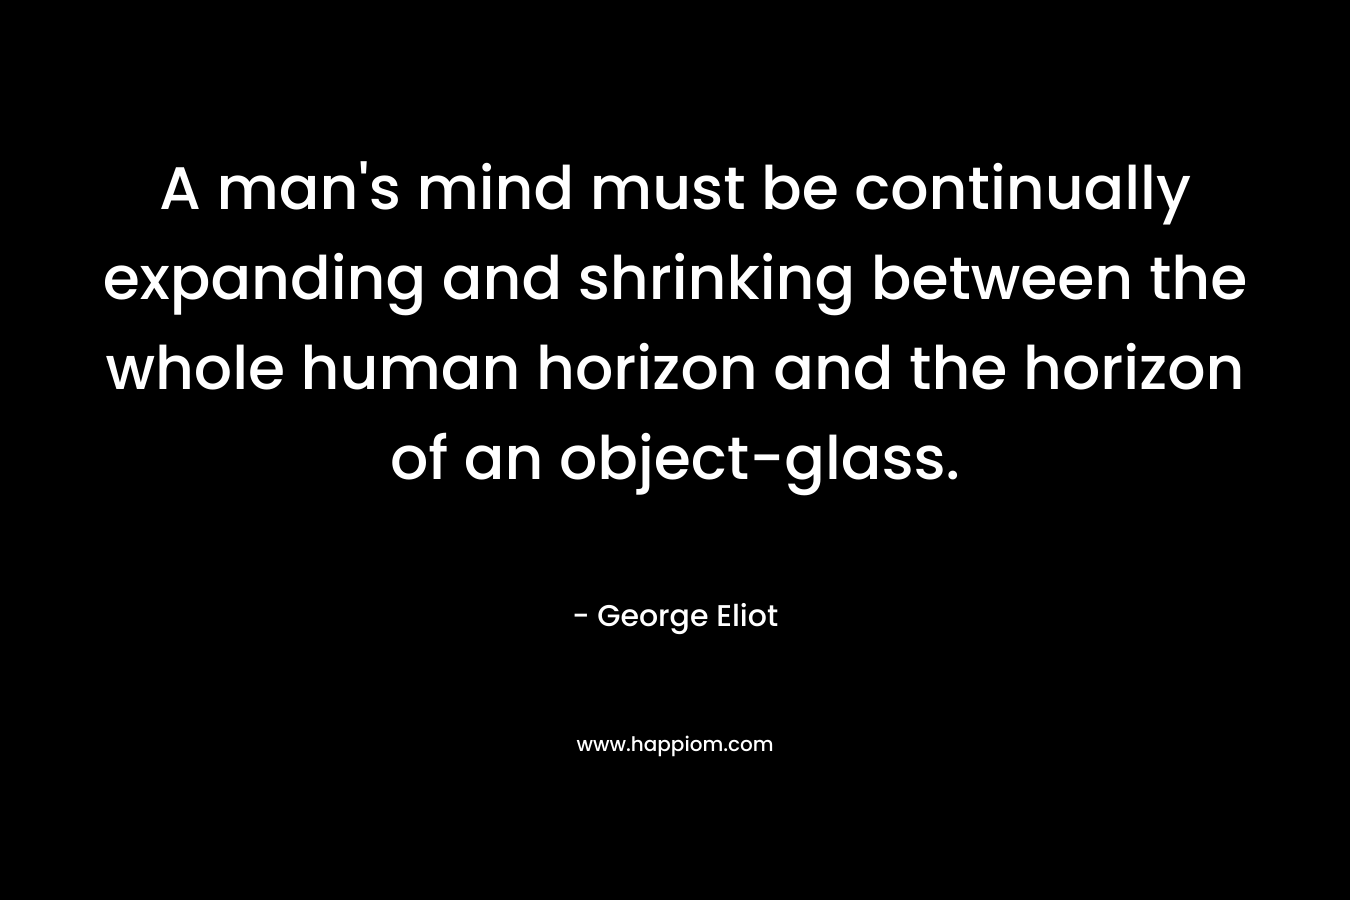 A man's mind must be continually expanding and shrinking between the whole human horizon and the horizon of an object-glass.